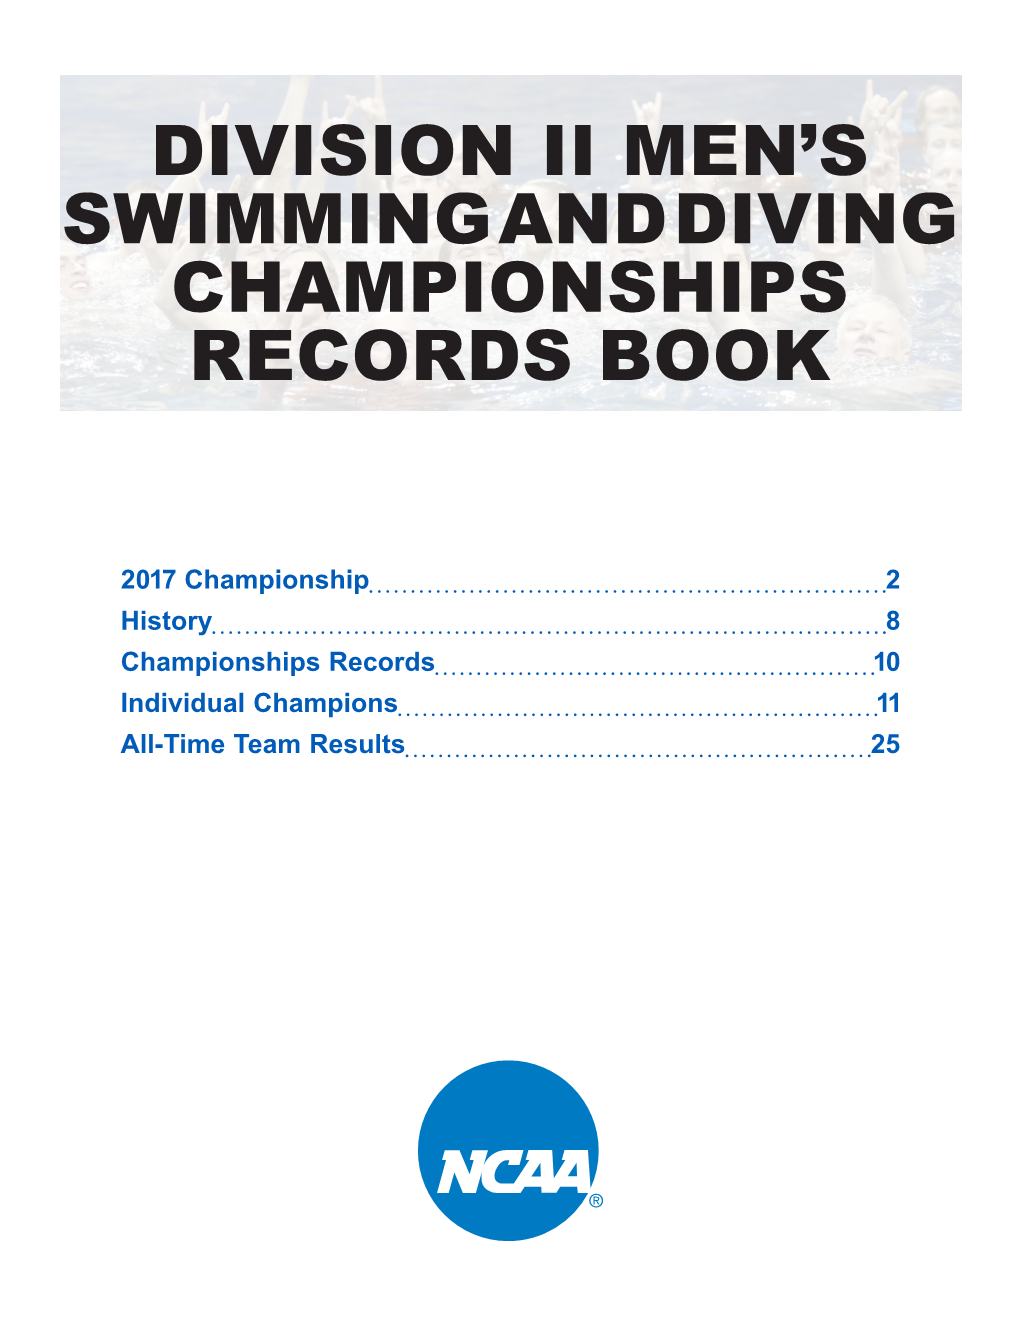 Division Ii Men's Swimming and Diving